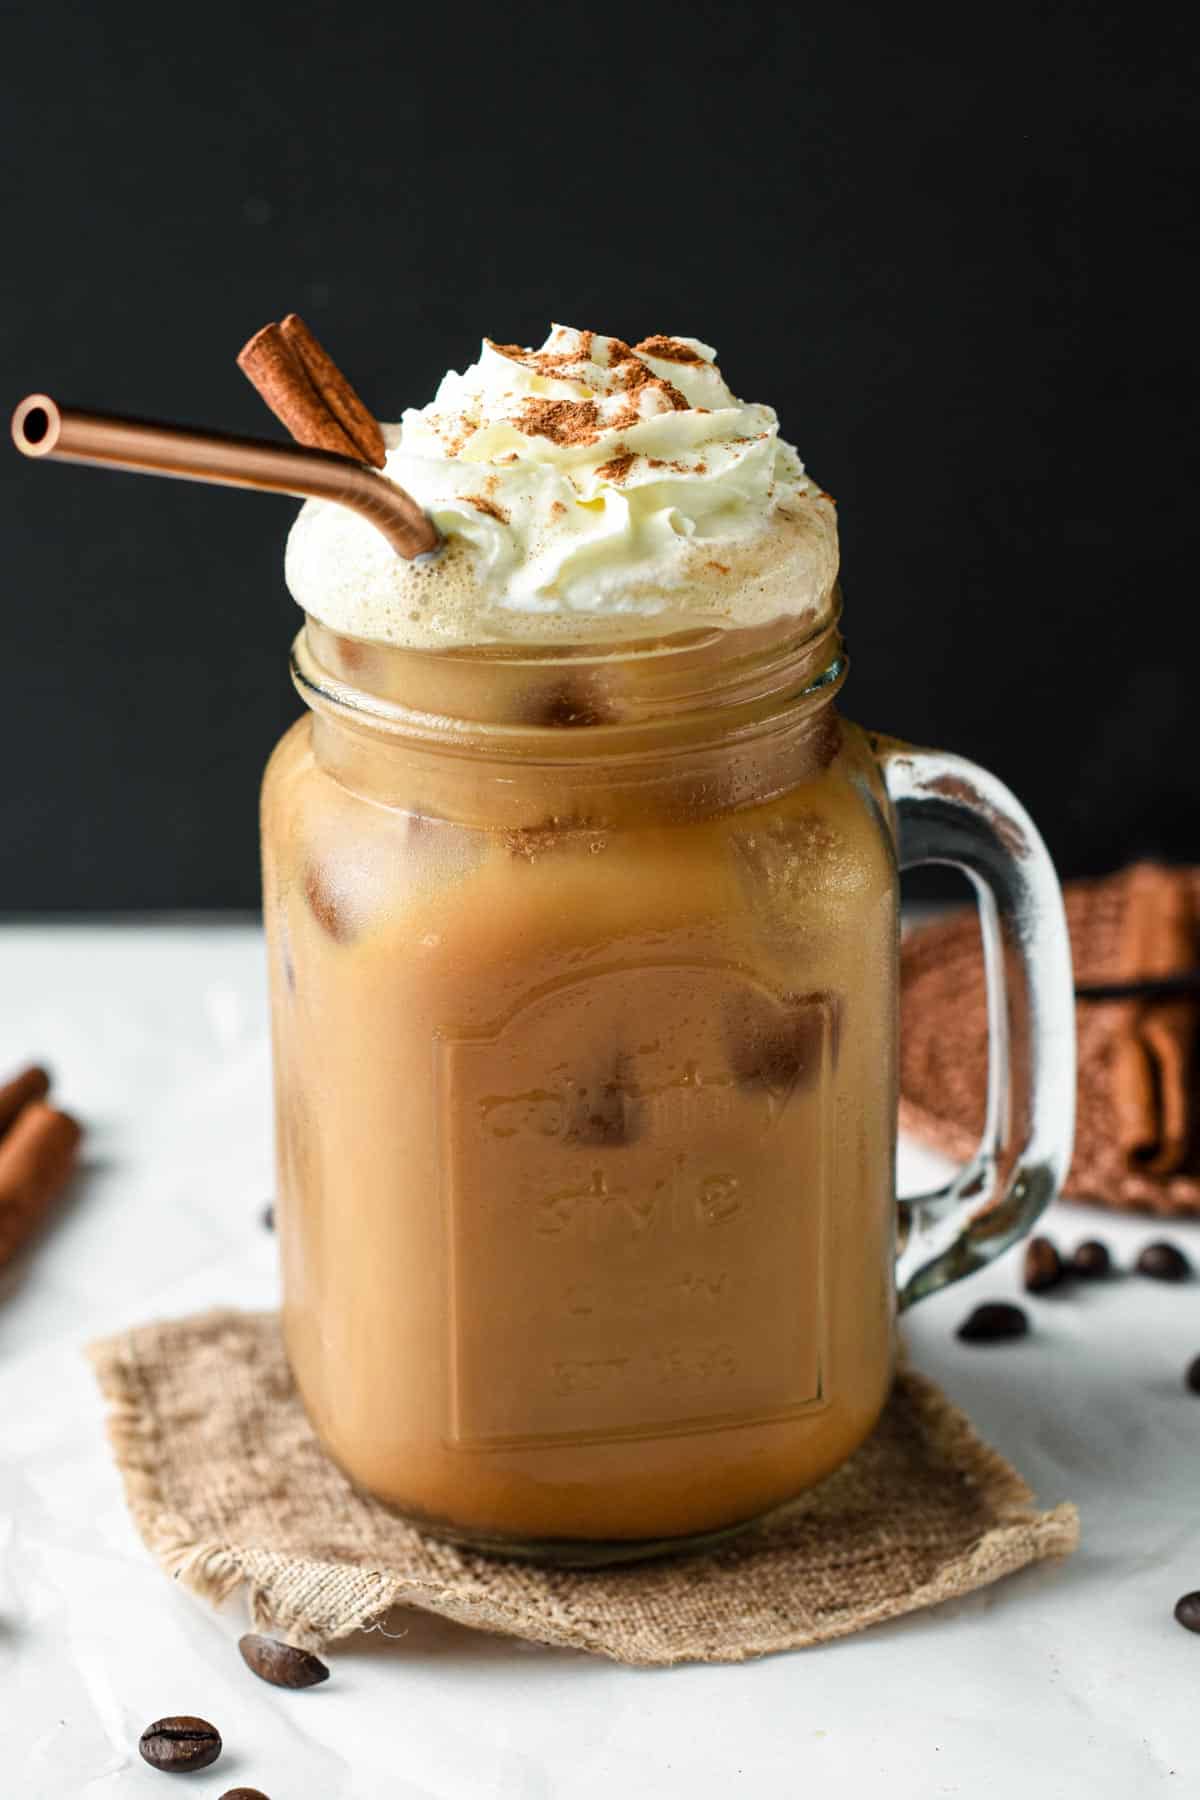 How to Make Iced Latte, Coffee Recipes